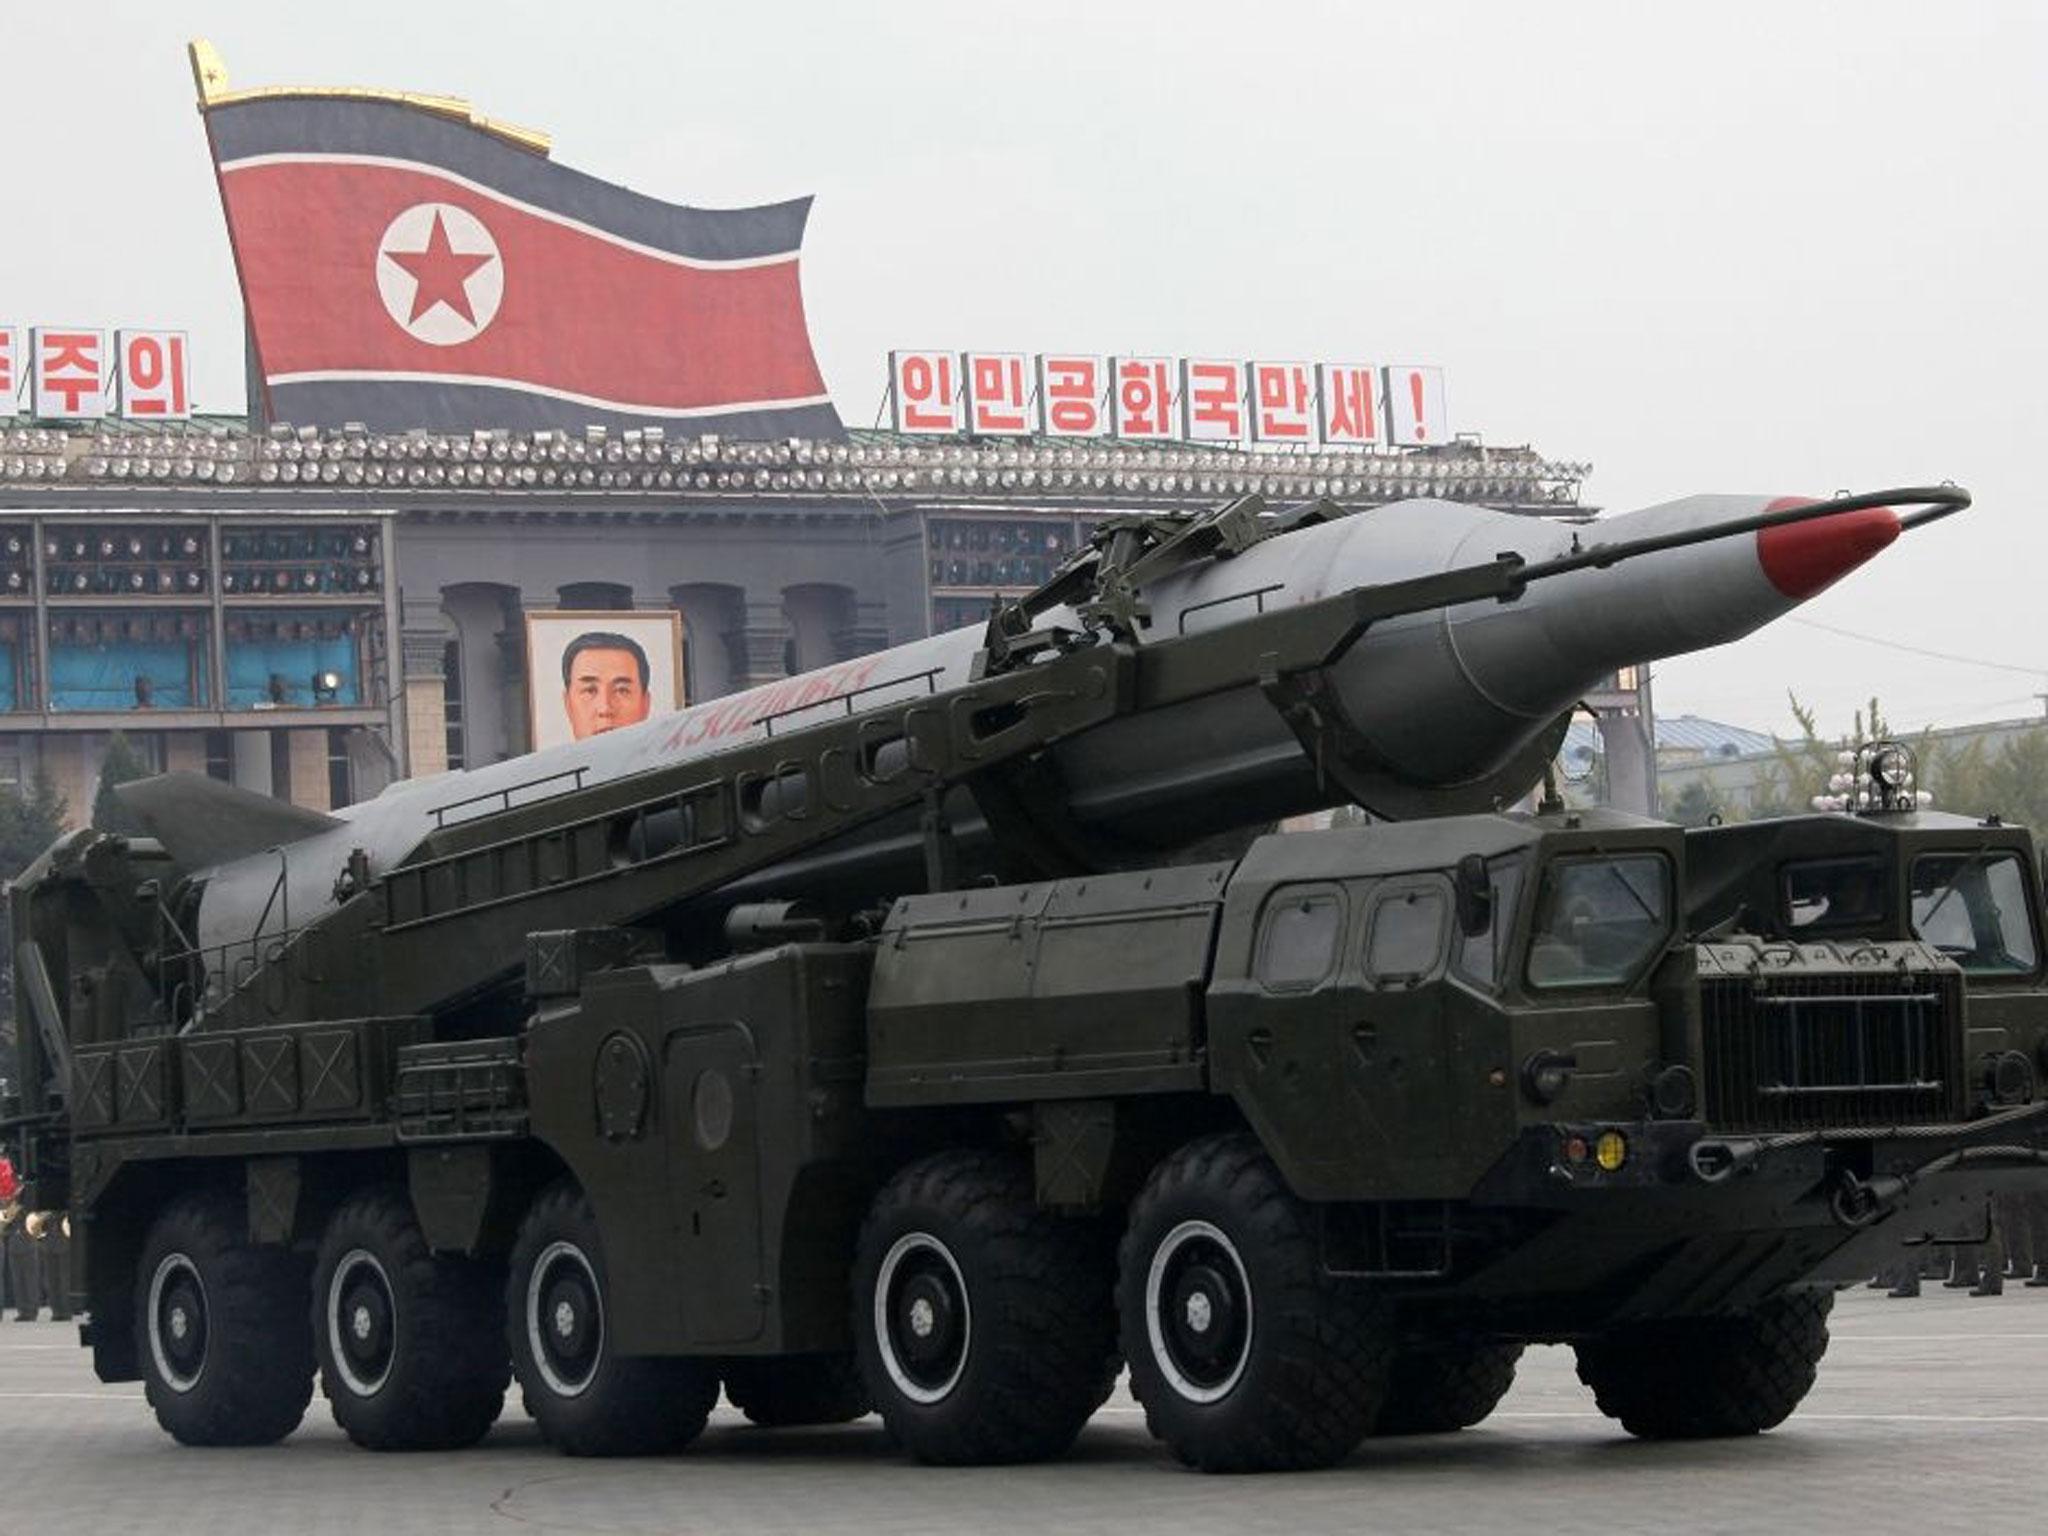 North Korean missiles on trucks make their way during a massive military parade to mark the 65th anniversary of the communist nation’s ruling Workers’ Party in Pyongyang